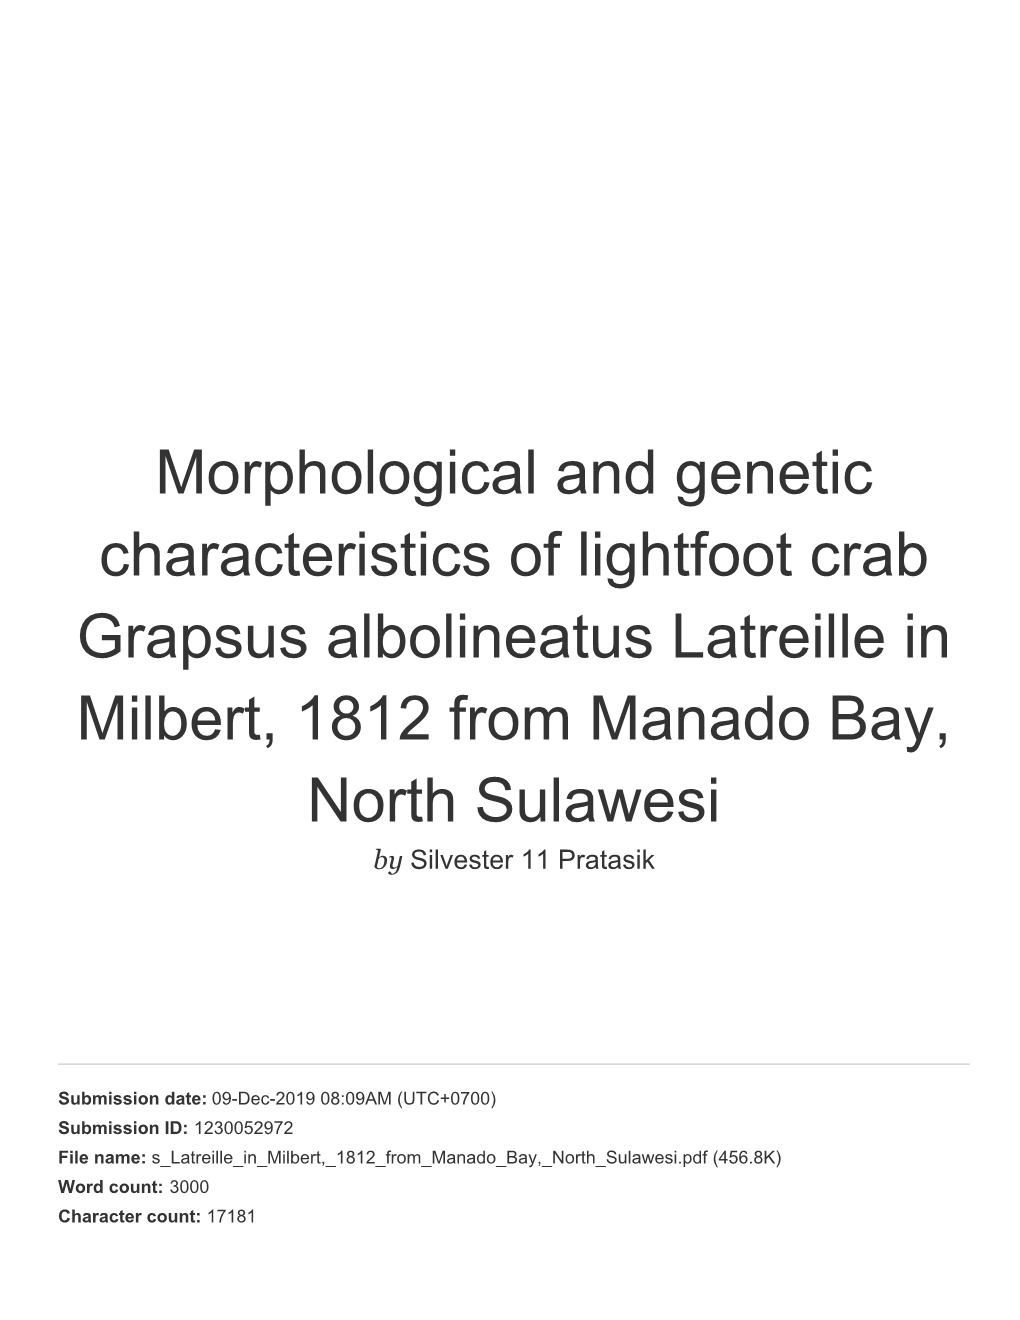 Morphological and Genetic Characteristics of Lightfoot Crab Grapsus Albolineatus Latreille in Milbert, 1812 from Manado Bay, North Sulawesi by Silvester 11 Pratasik